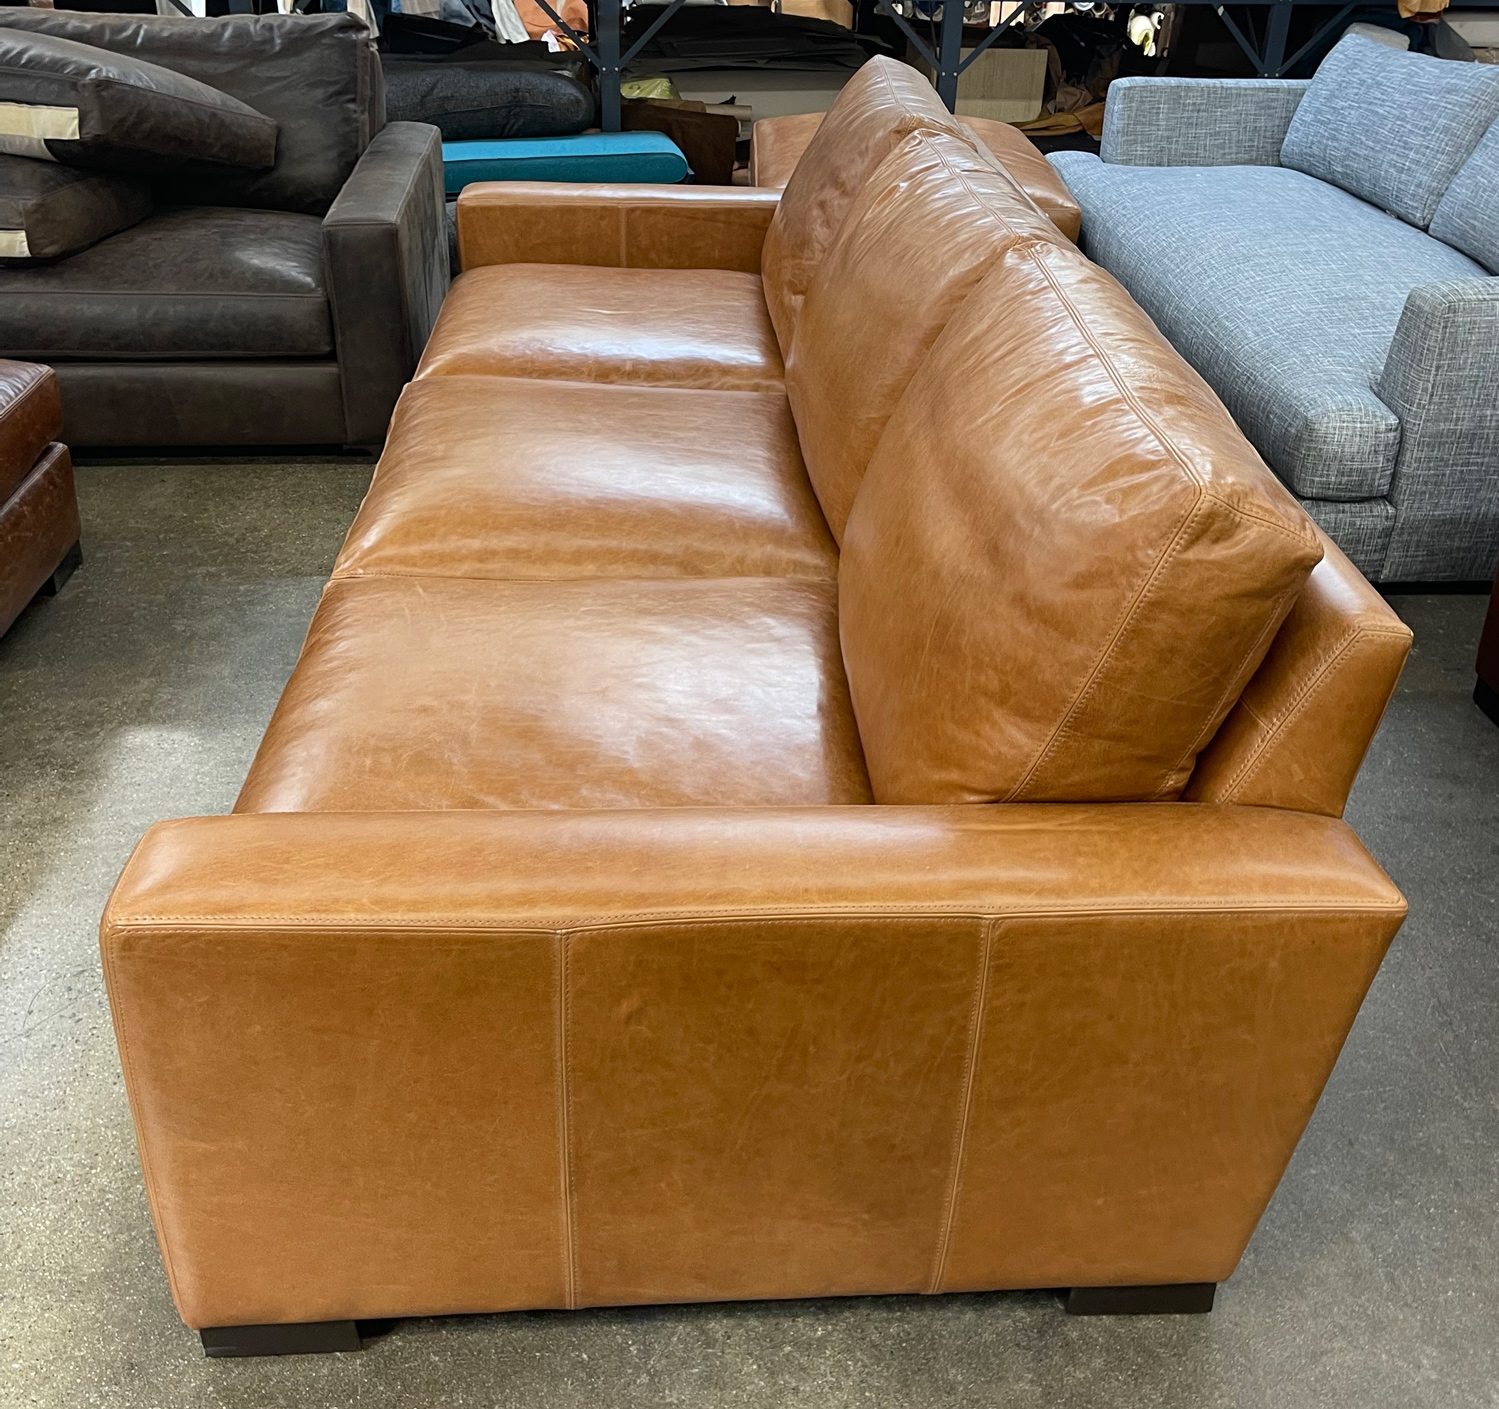 Braxton 108" x 46" Sofa in Mont Blanc Sycamore Leather - side view